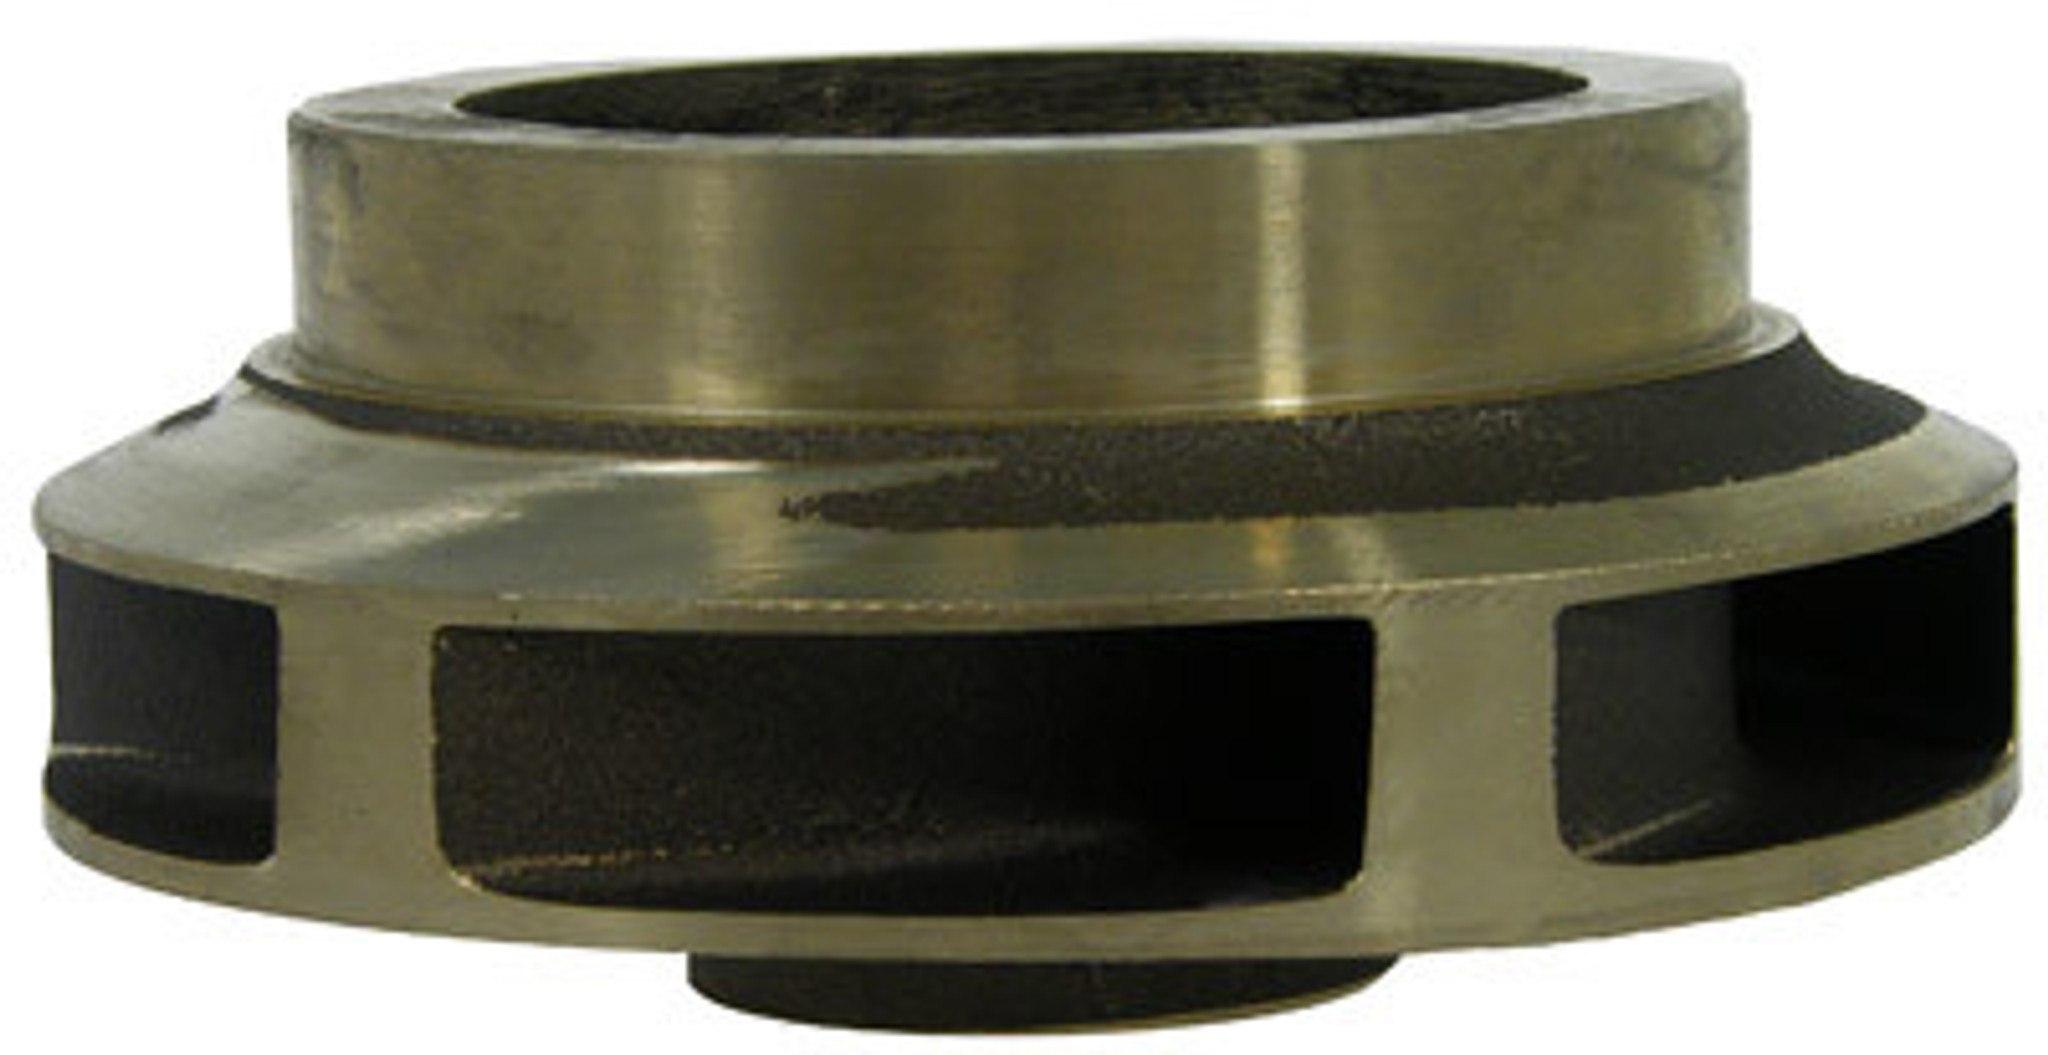 Pentair S32014 Mechanical Shaft Seal Replacement for Pentair CSPH//CCSPH Series Pool and Spa Commercial Pump